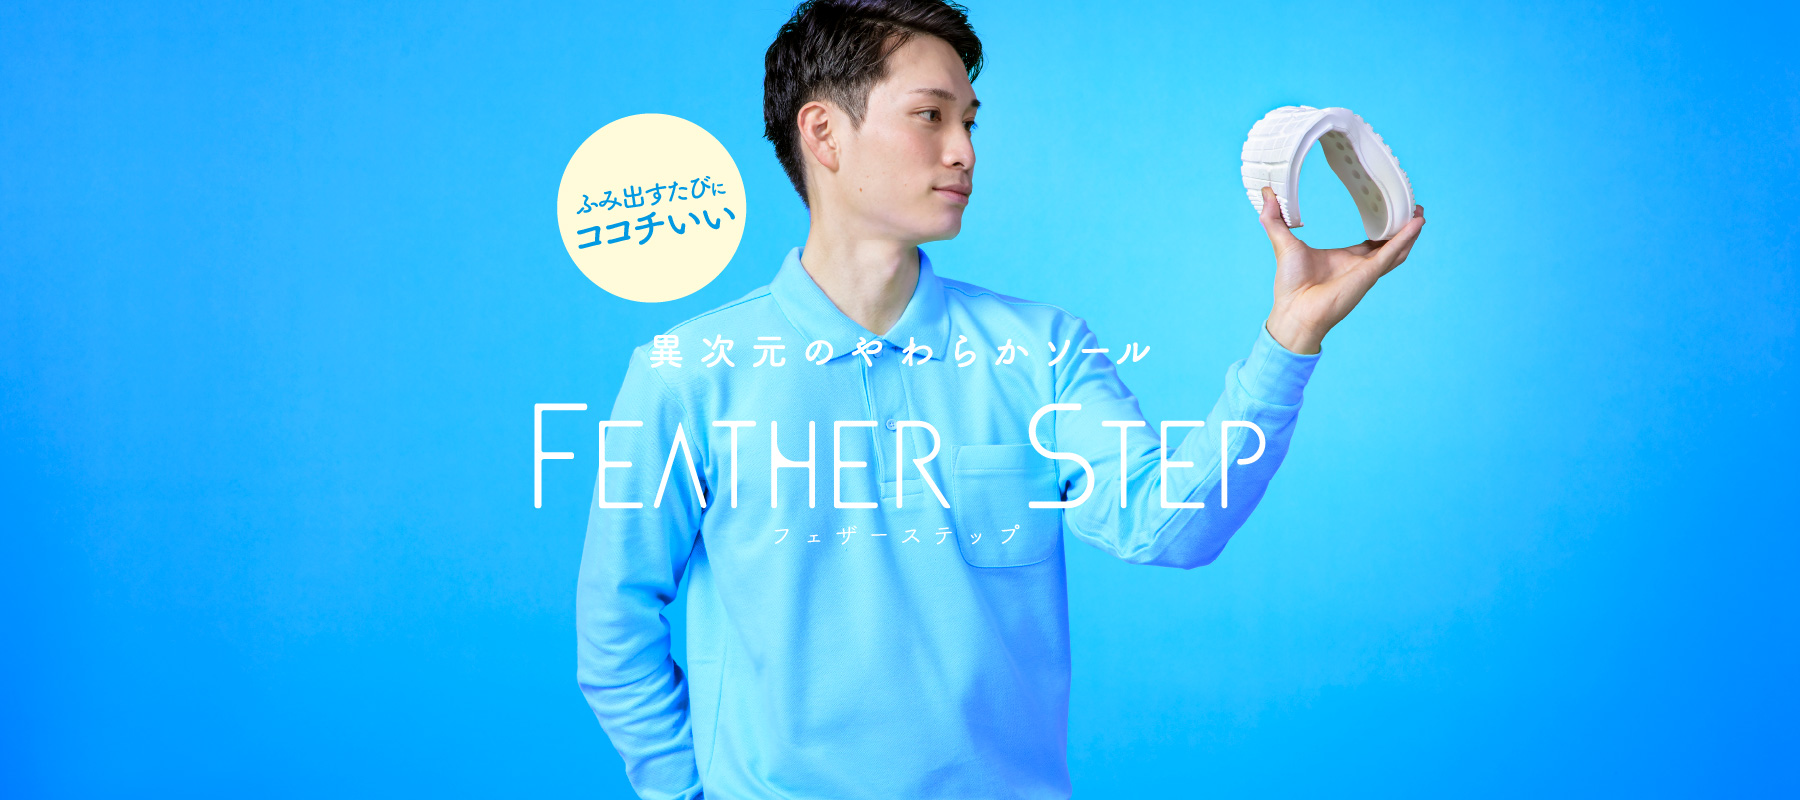 FEATHER STEP Blog